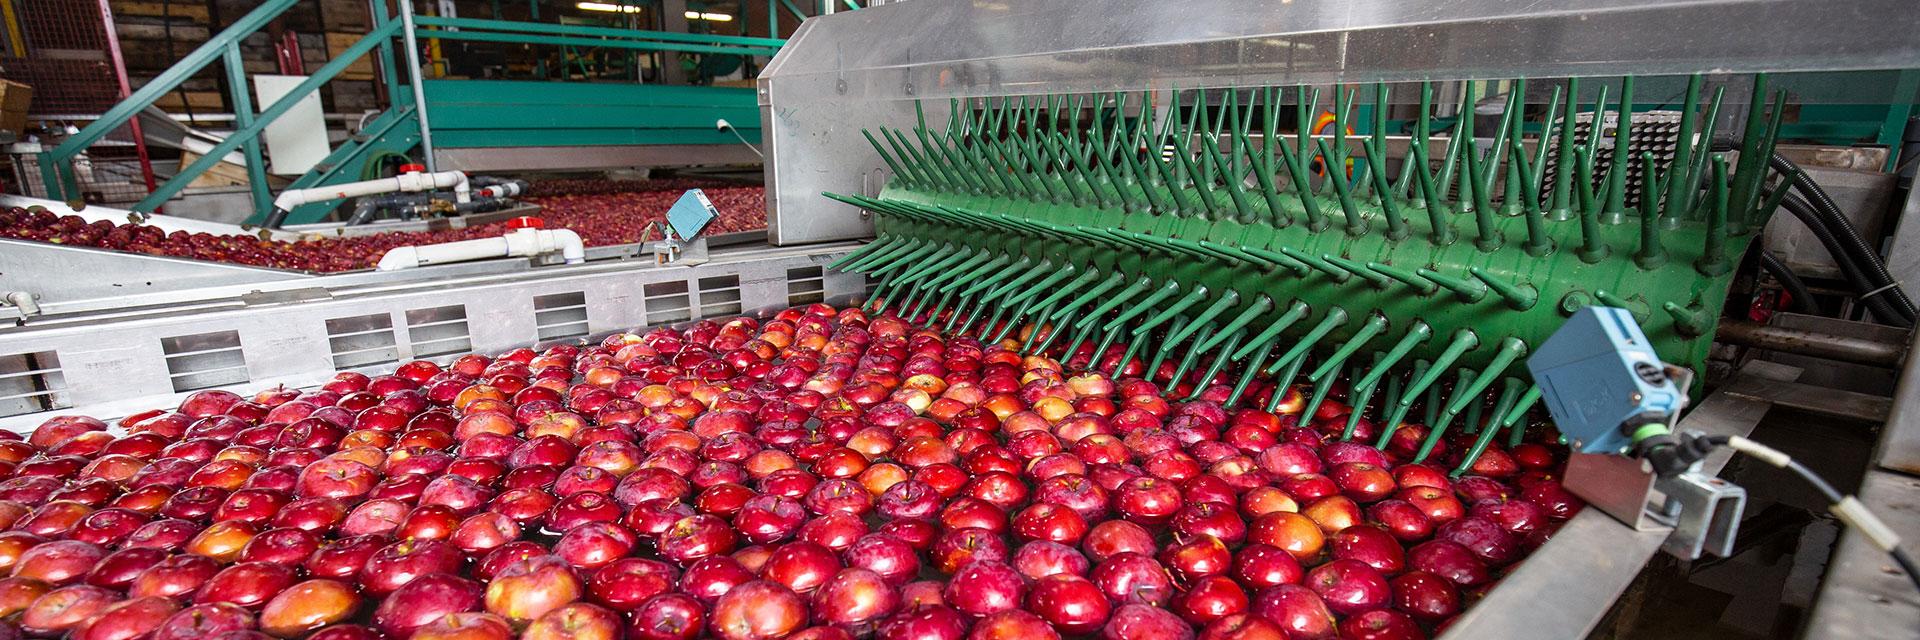 Scotian gold apple processing